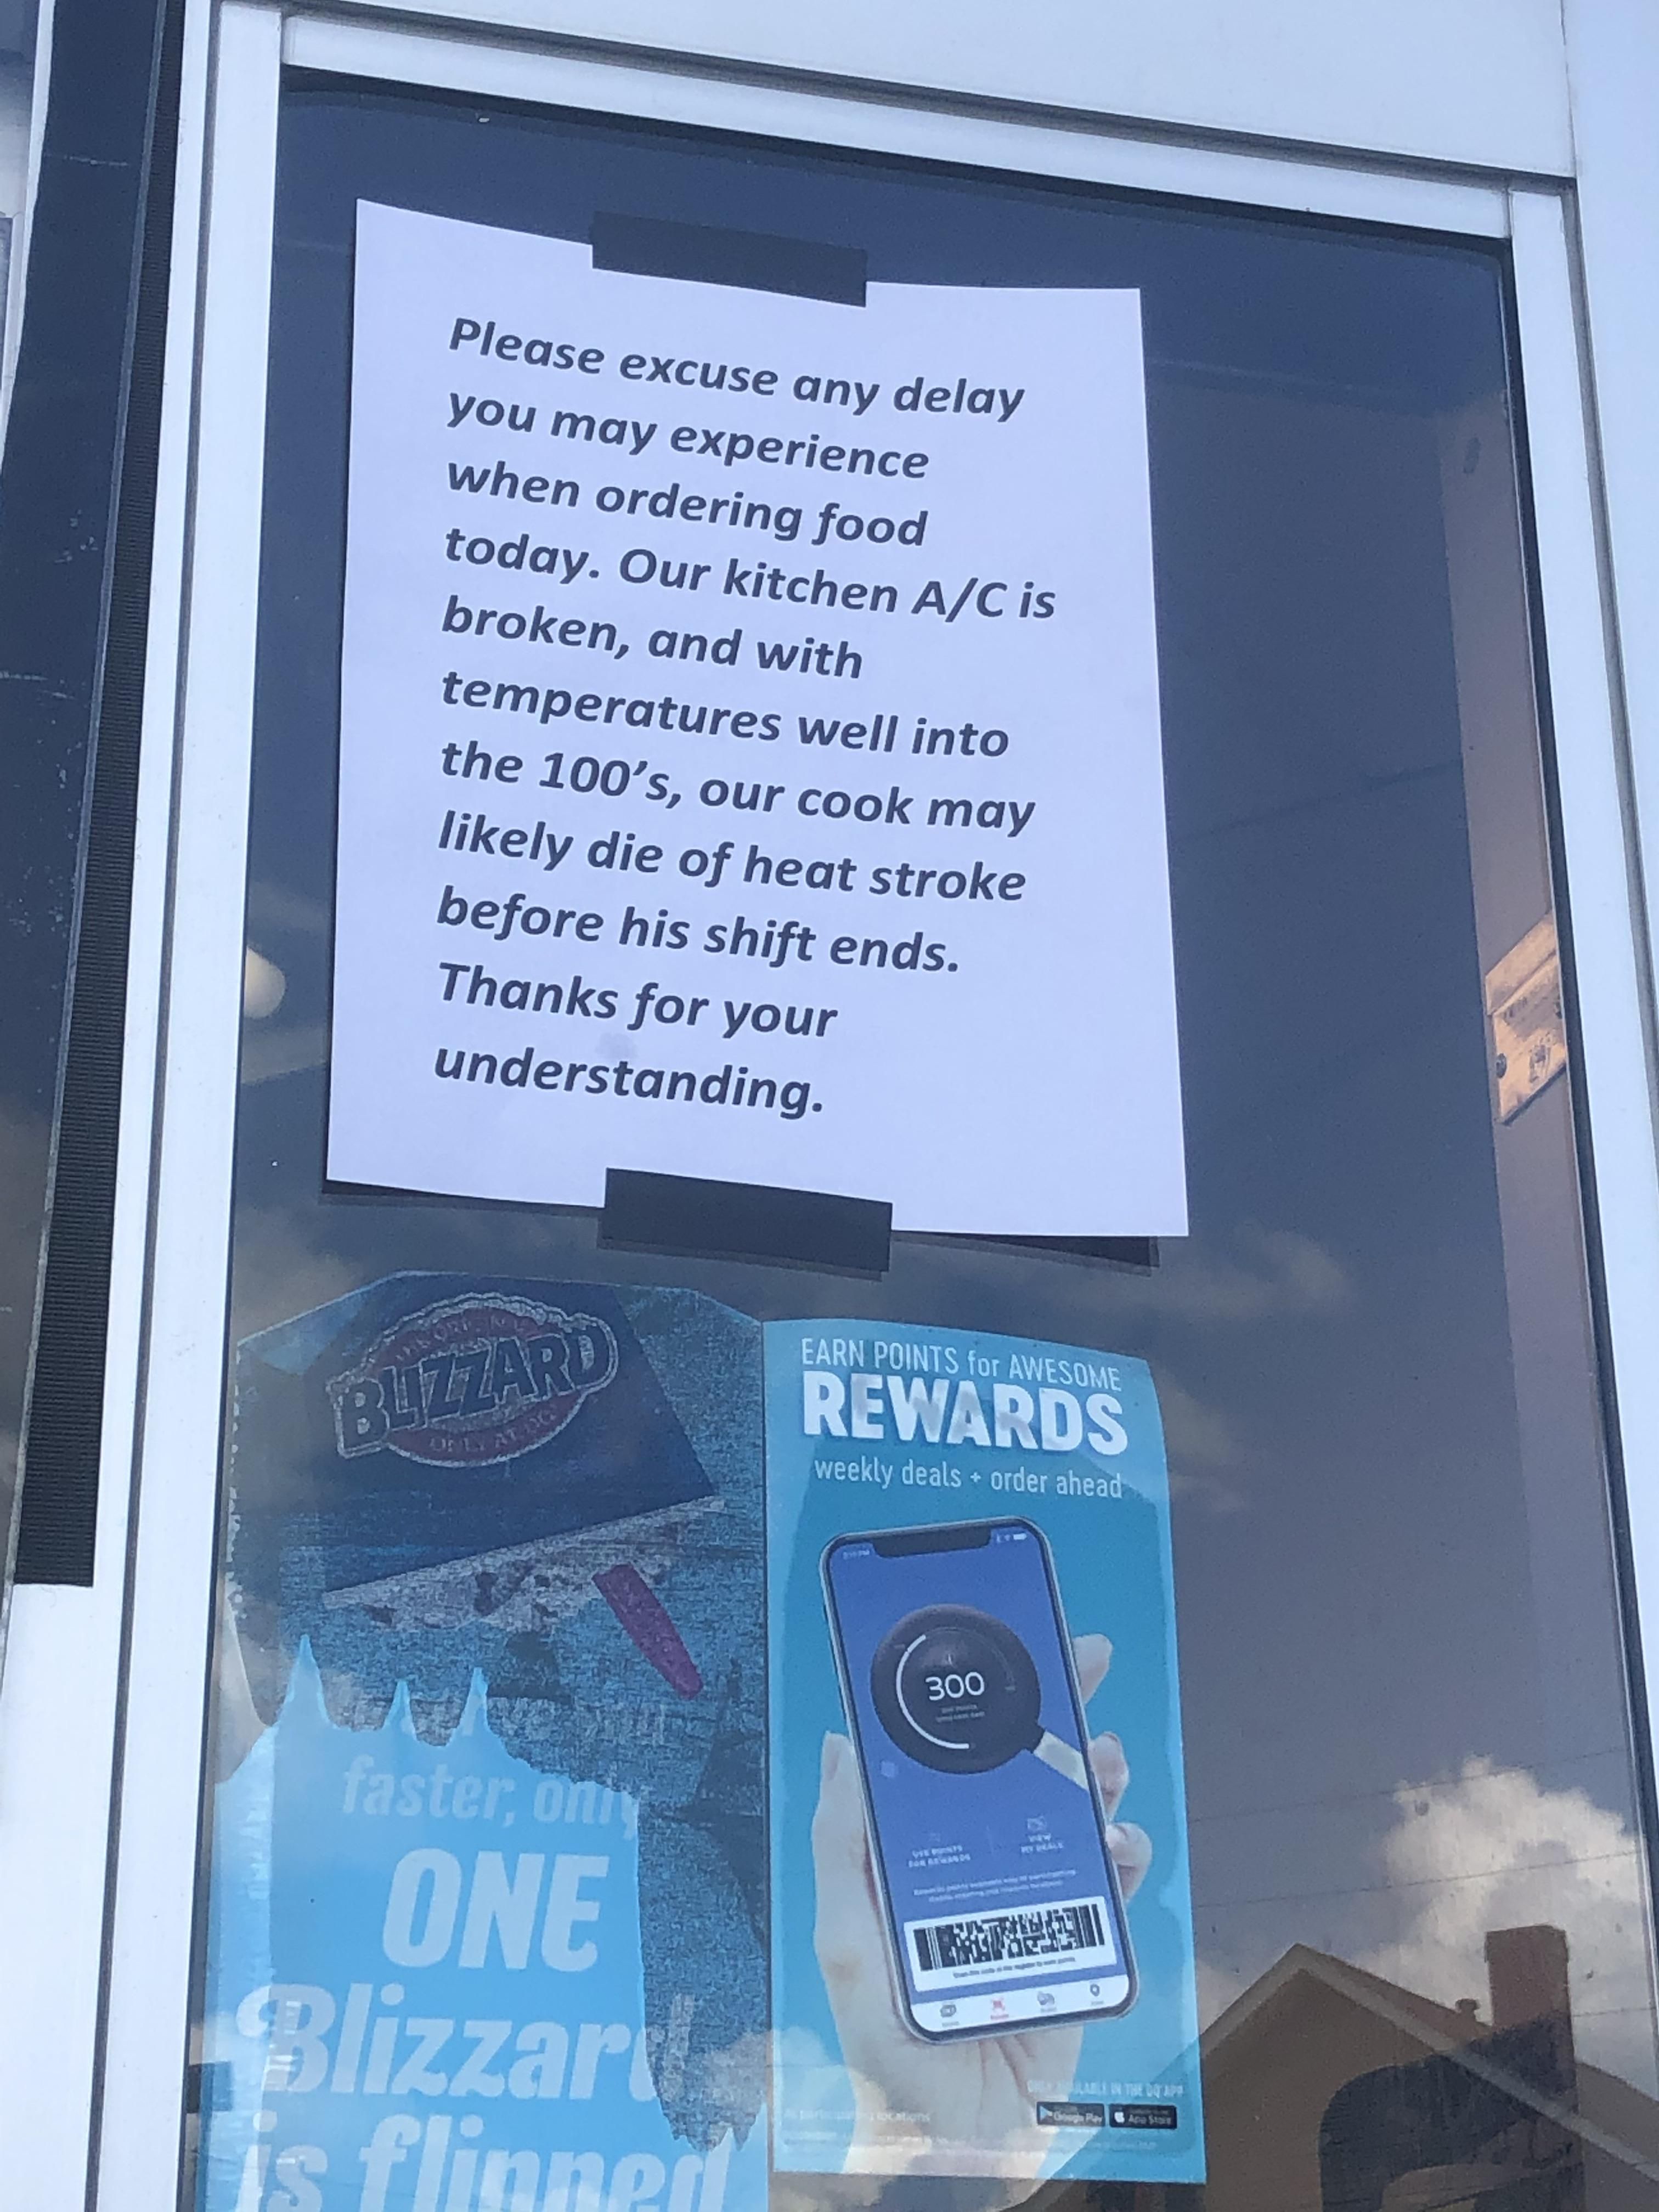 Spotted at the local Dairy Queen